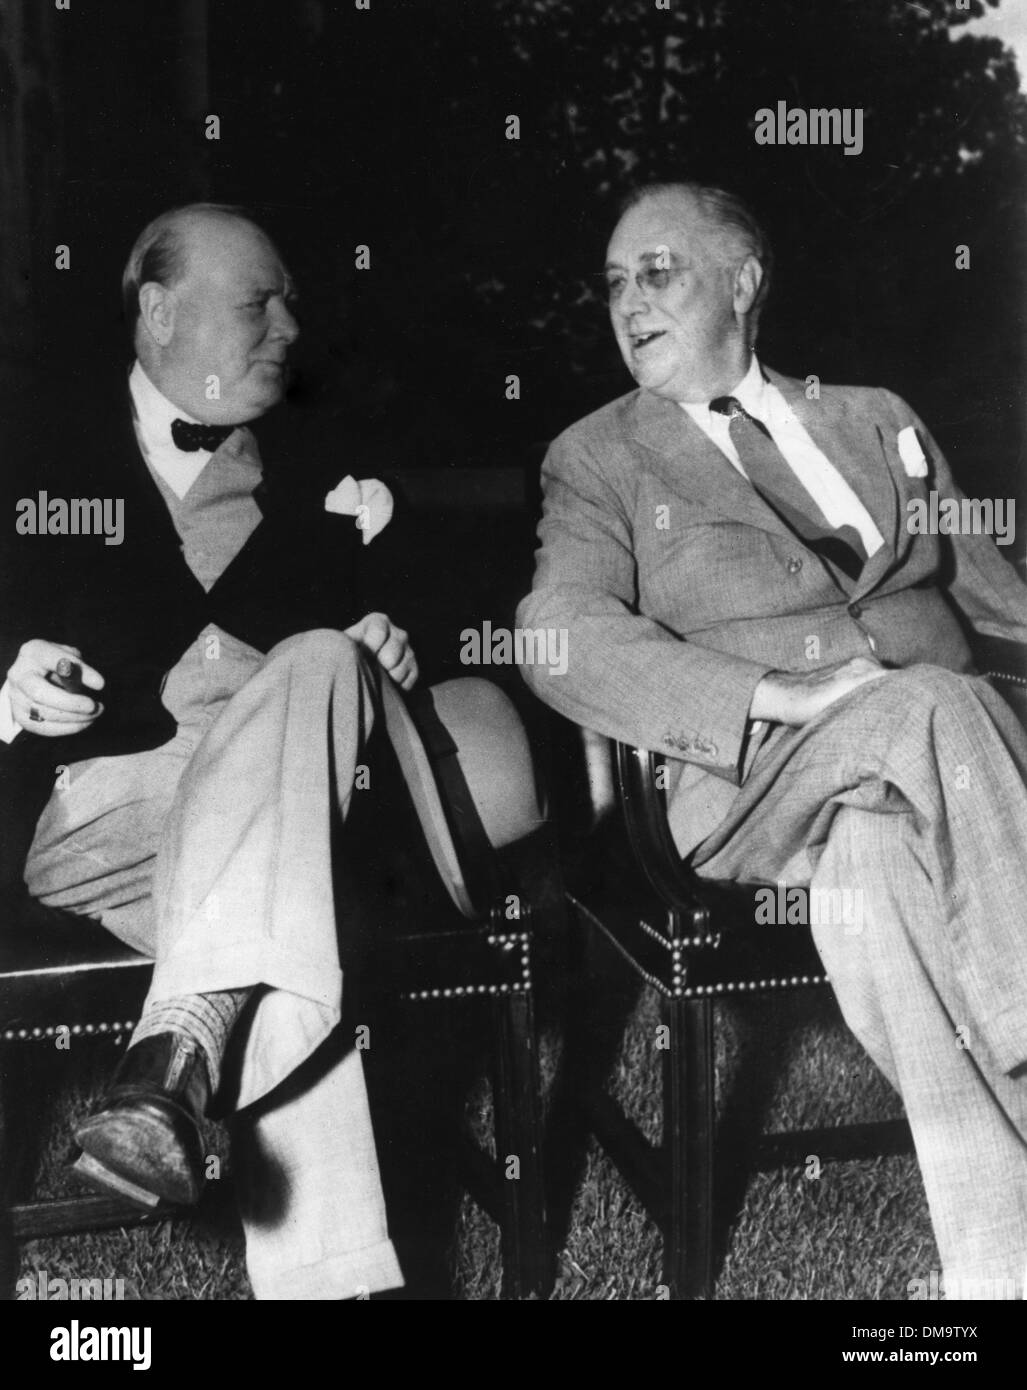 June 27, 1943 - Washington D.C., USA - President FRANKLIN D. ROOSEVELT and Prime Minister SIR WINSTON CHURCHILL sit at the South Grounds of the White House prior to the Daily Meeting of Chief of Staffs. PICTURED: Roosevelt telling Churchill about his beautiful rose garden. (Credit Image: © KEYSTONE Pictures USA) Stock Photo